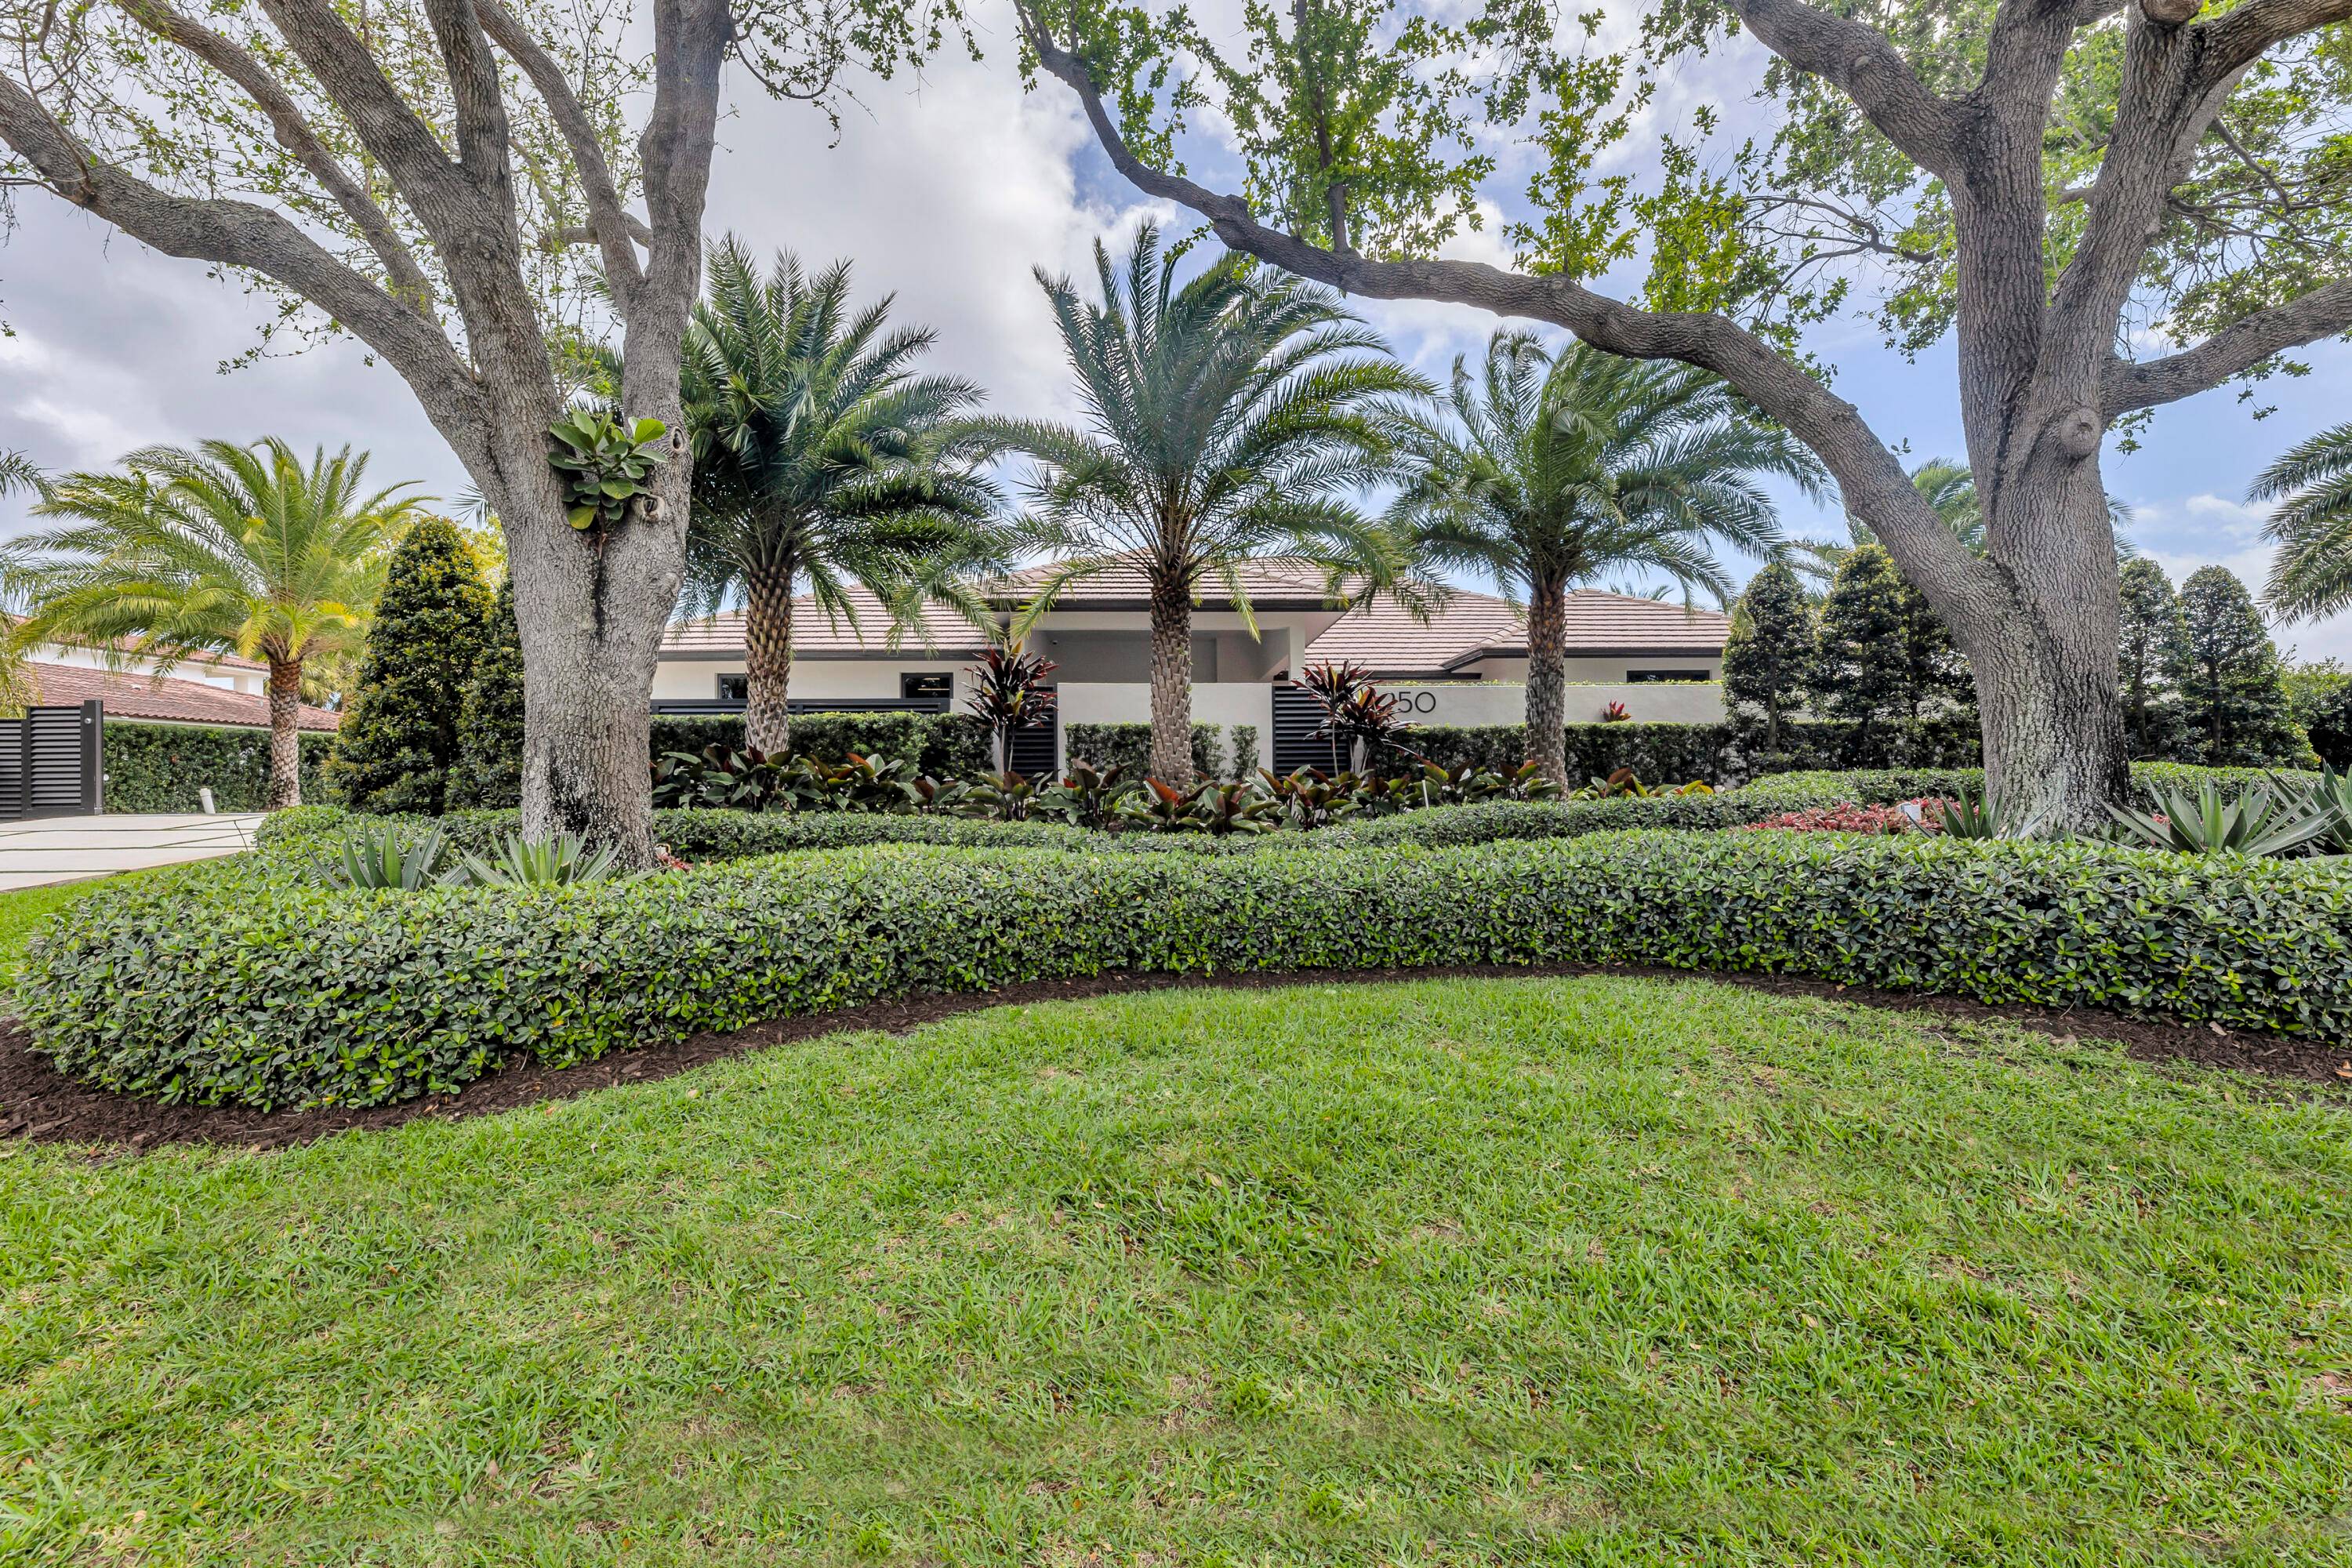 Introducing this exquisite family home on enormous 1 2 acre directly on the prestigious Coral Ridge Country Club Golf Course.